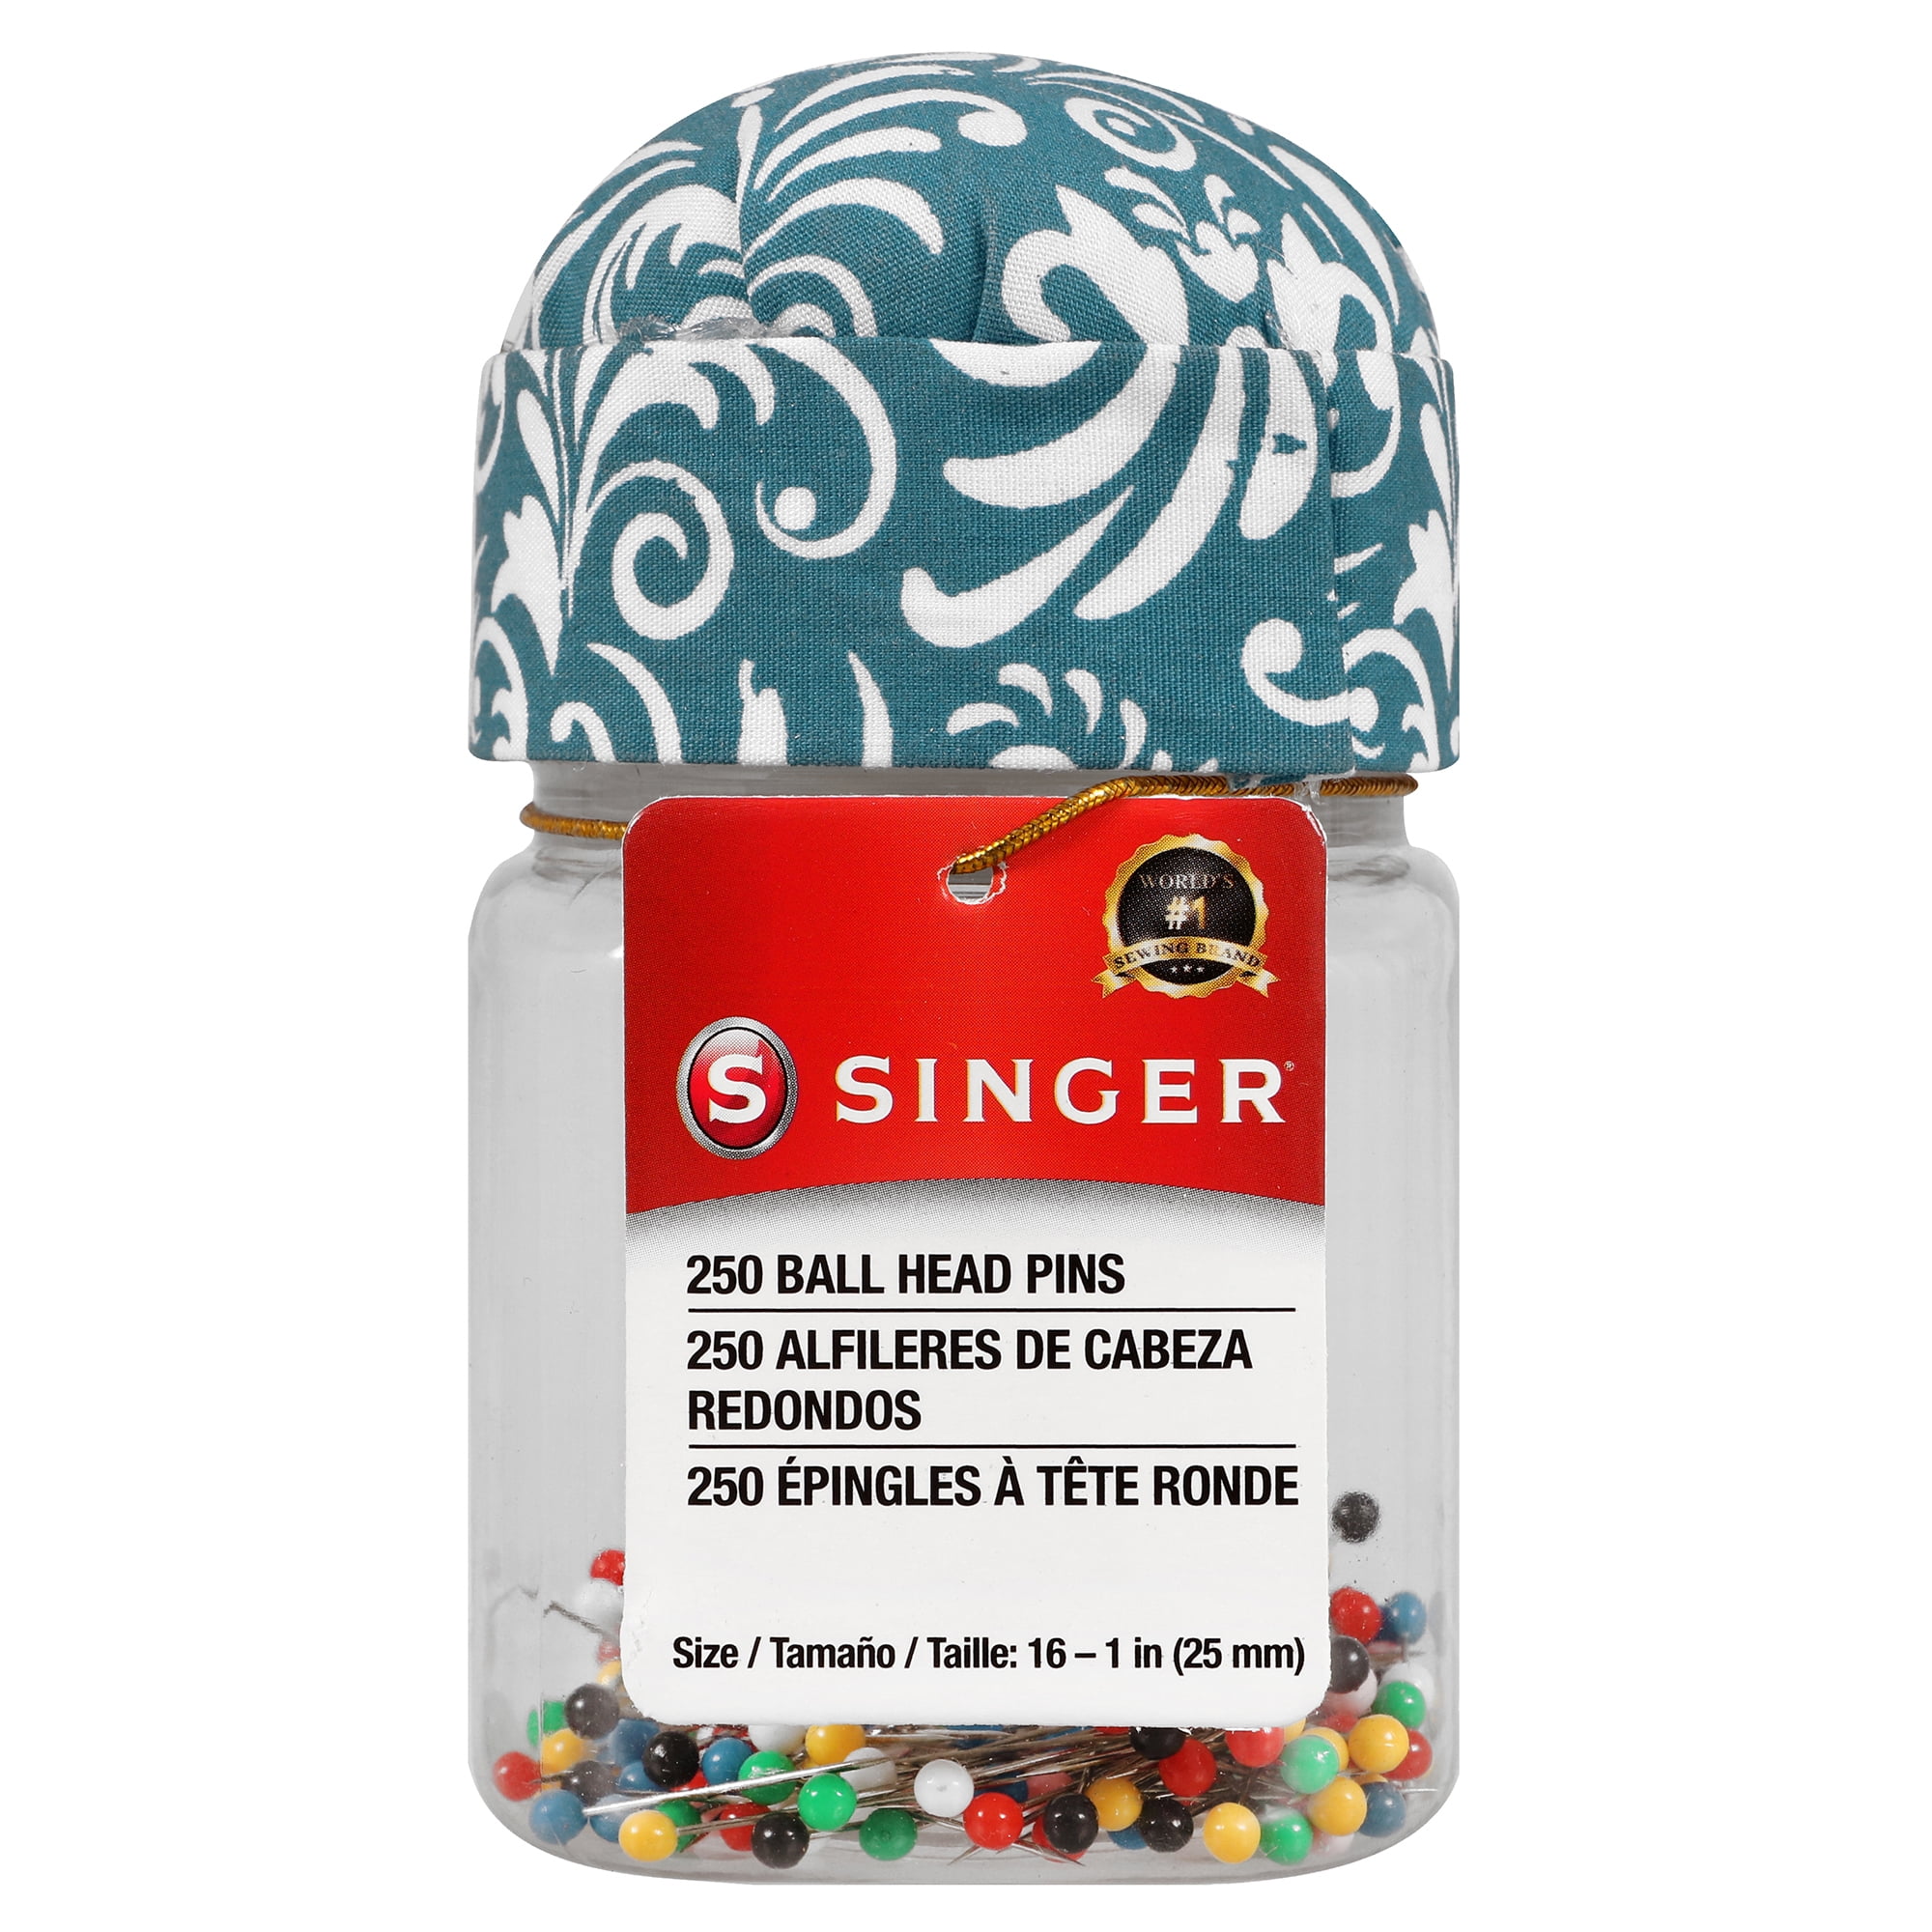 SINGER Ball Head Steel Straight Pins in Jar with Pincushion Top, 250 Count,  Assorted Colors